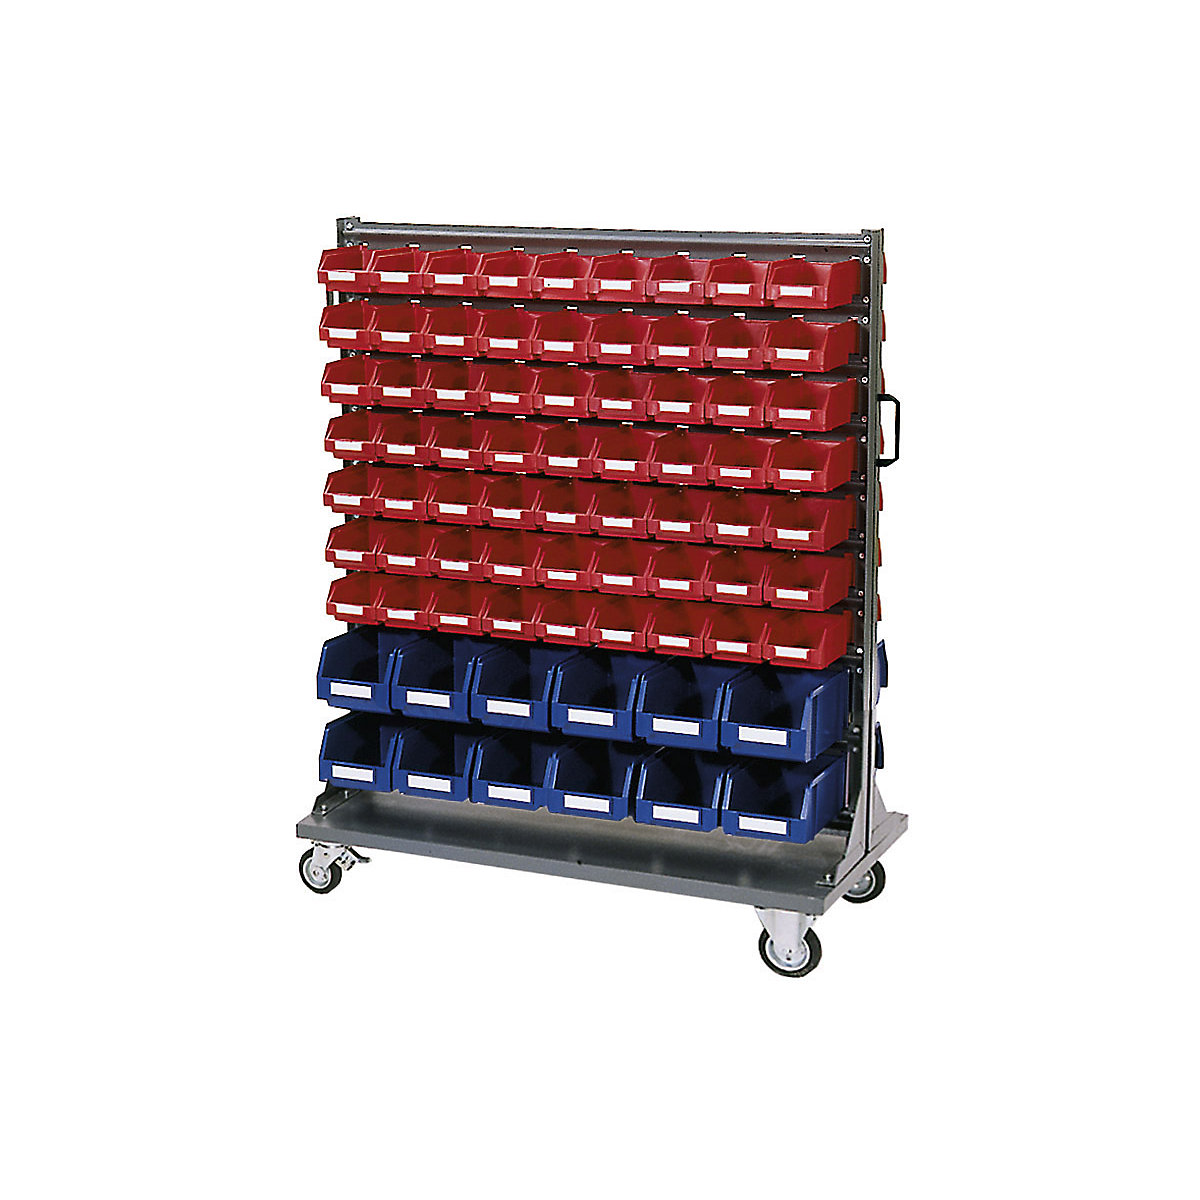 Storage shelf unit dolly, with open fronted storage bins, height 1265 mm-5